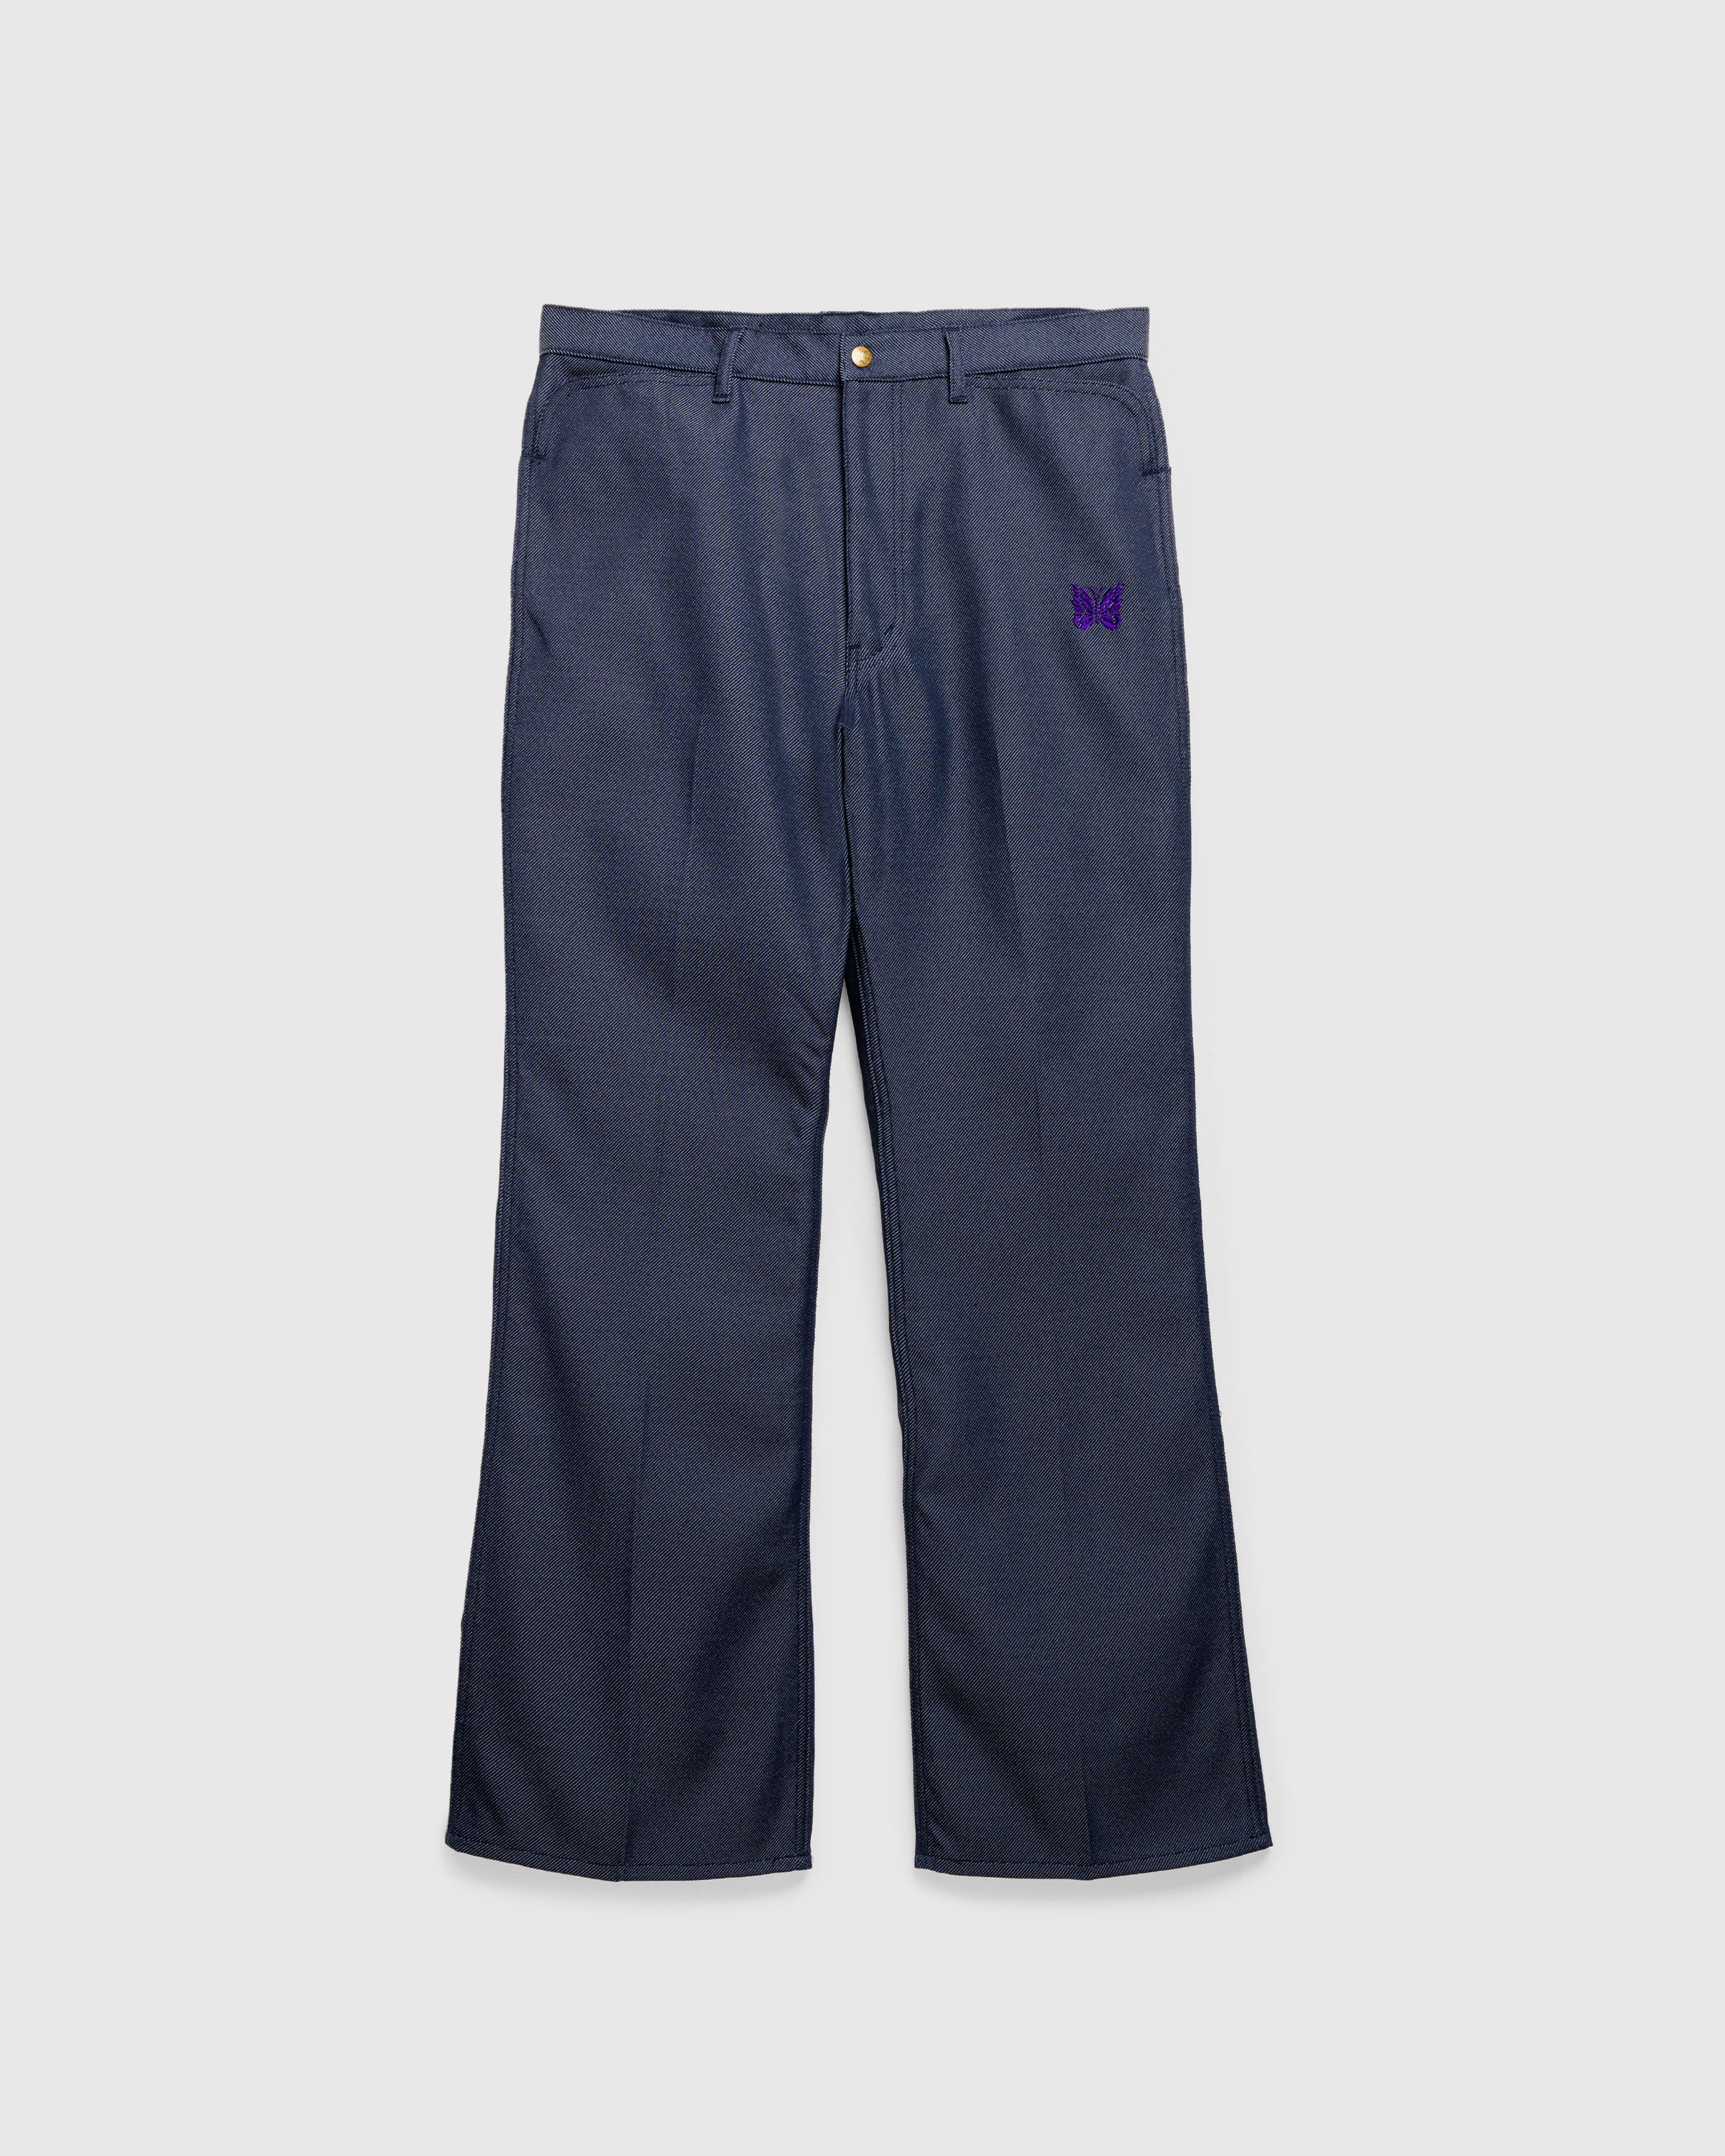 Needles – Boot-Cut Jean Poly Twill Navy - Pants - Blue - Image 1